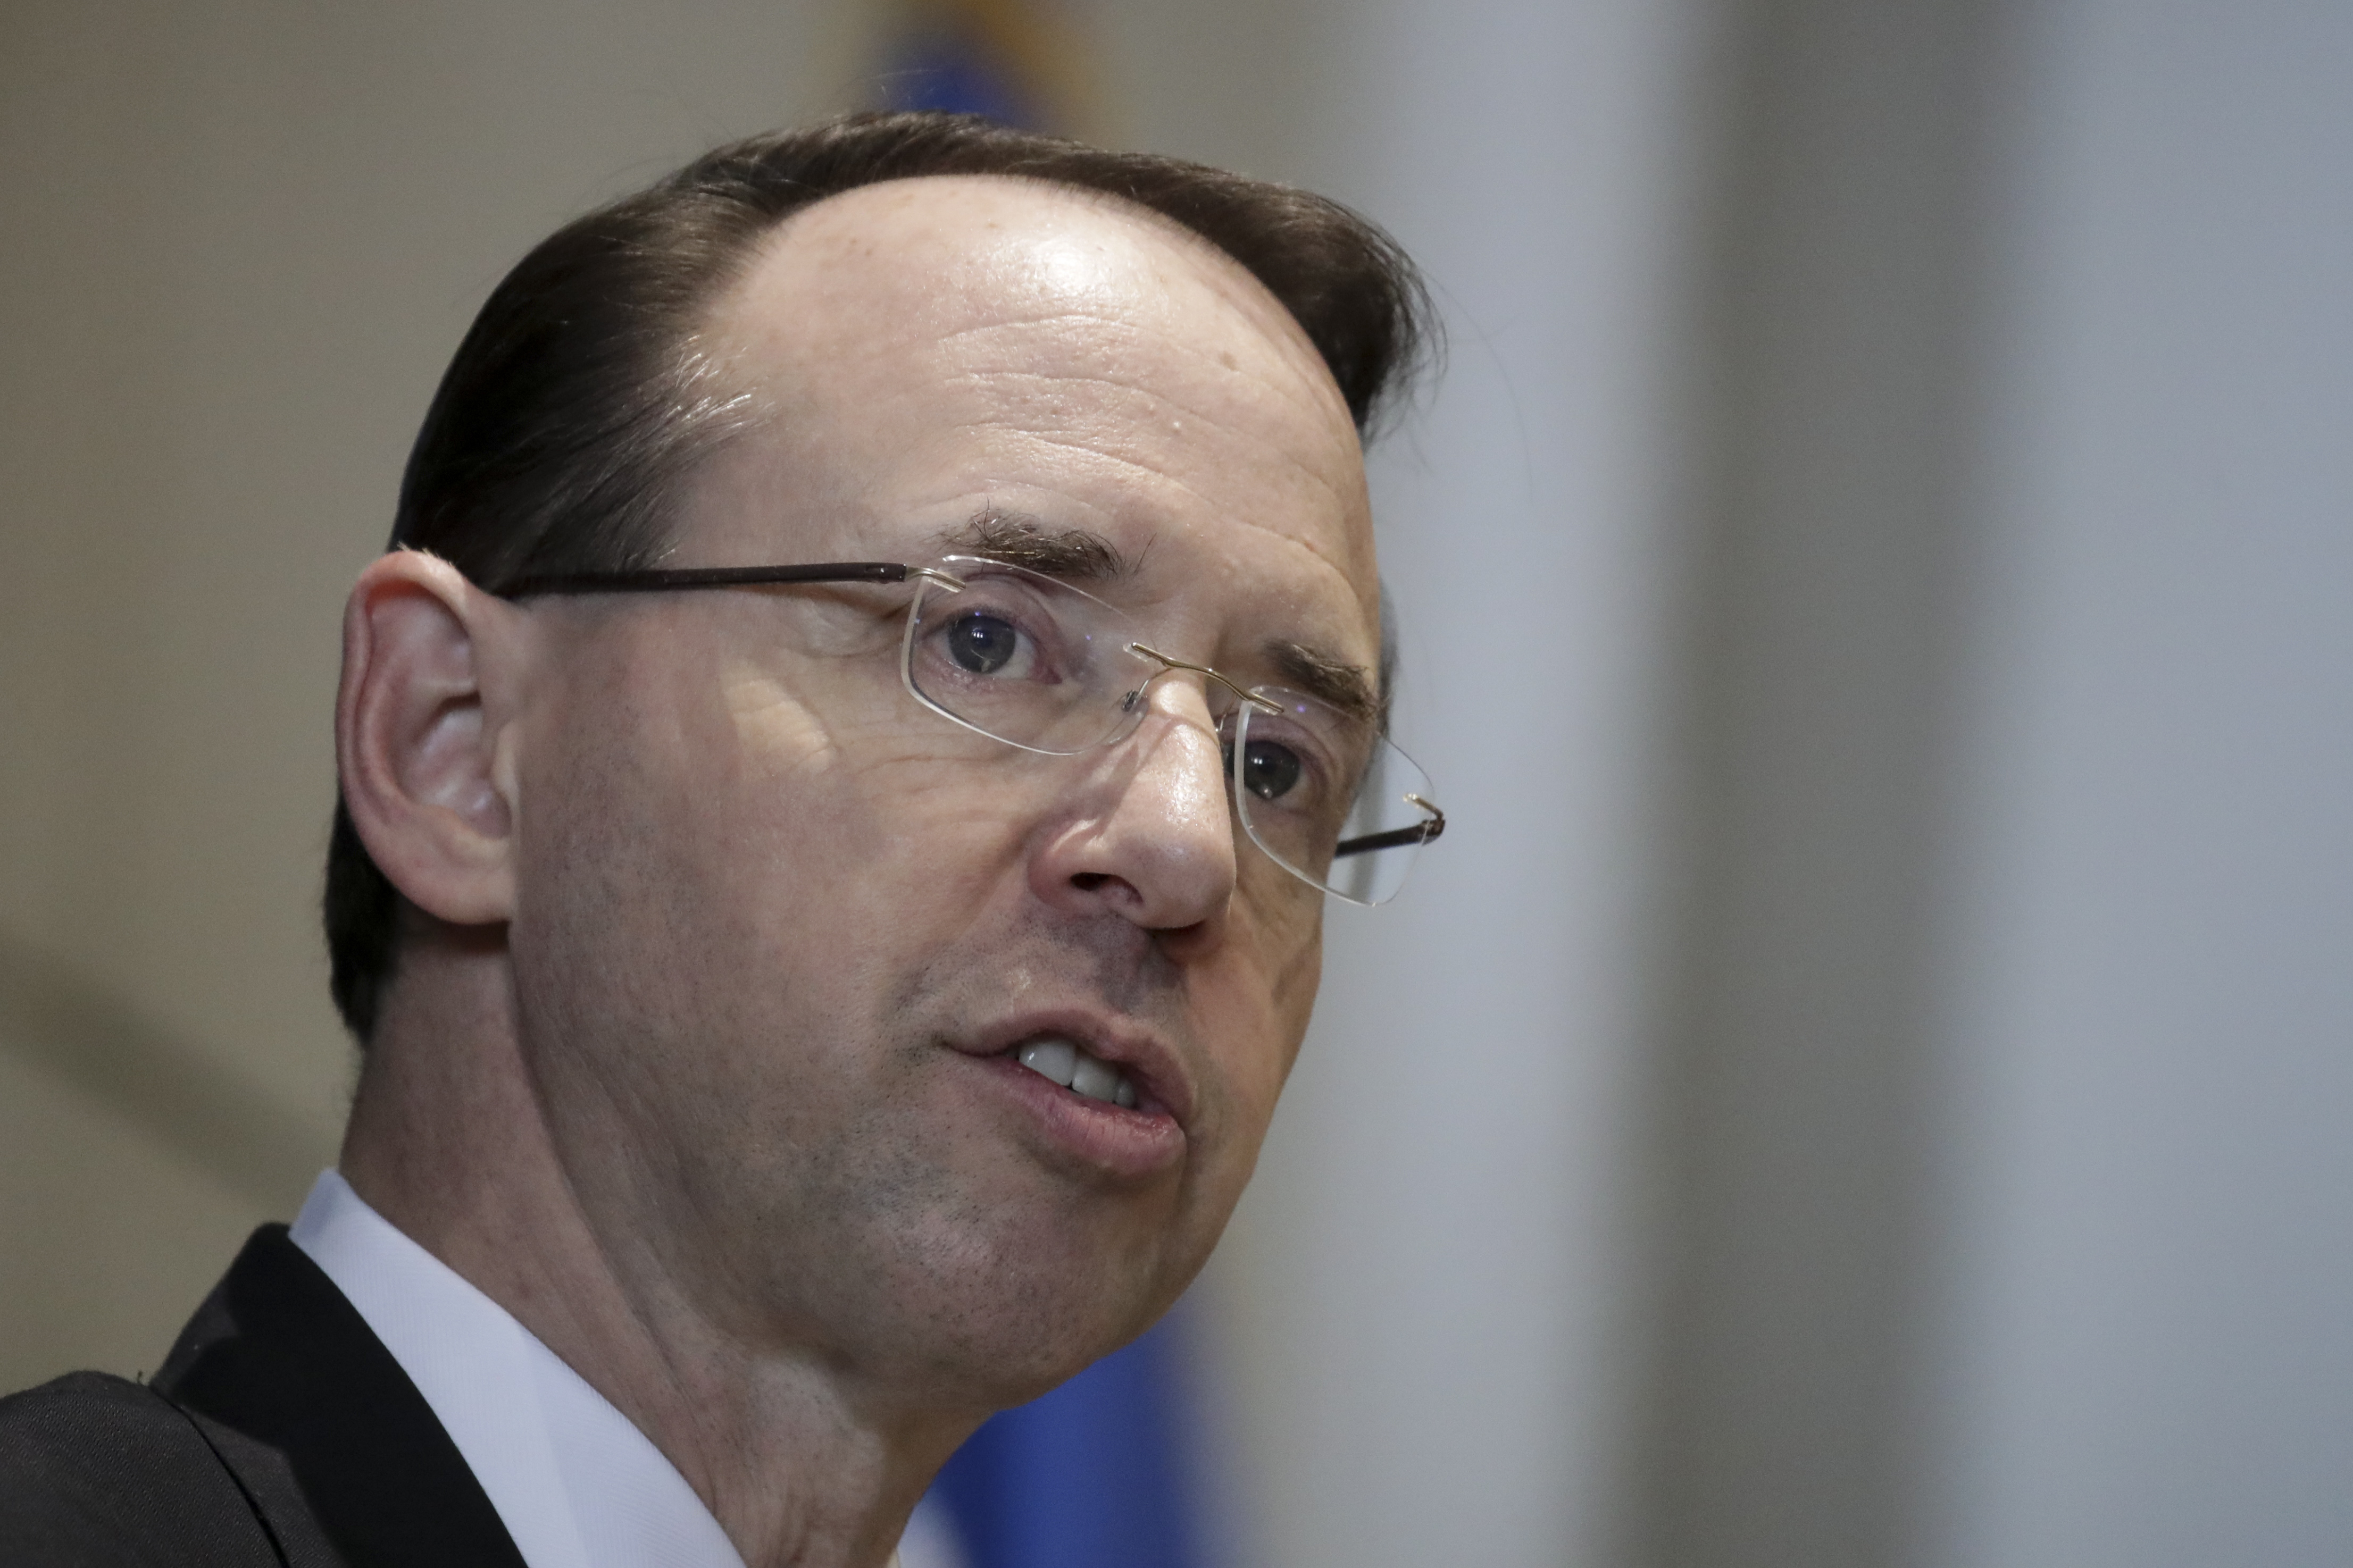 U.S. Deputy Attorney General Rod Rosenstein speaks at the New York City Bar Association's annual White Collar Crime Institute on May 9, 2018 in New York City. (Drew Angerer/Getty Images)